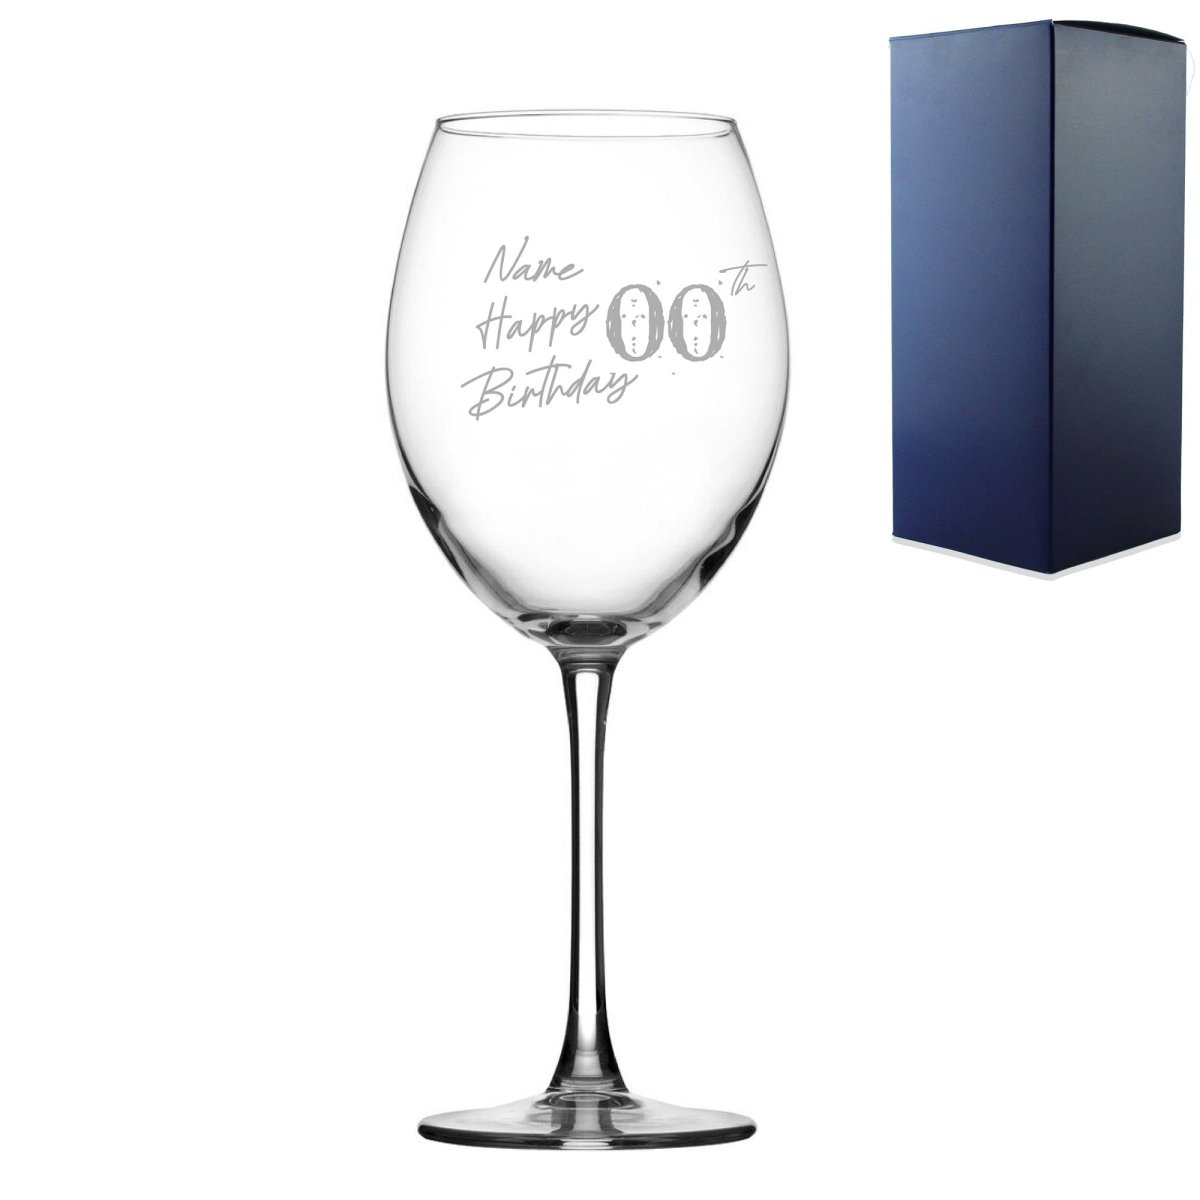 Engraved Enoteca Wine Glass Happy 20th, 30th, 40th, 50th...Birthday Speckled, Gift Boxed